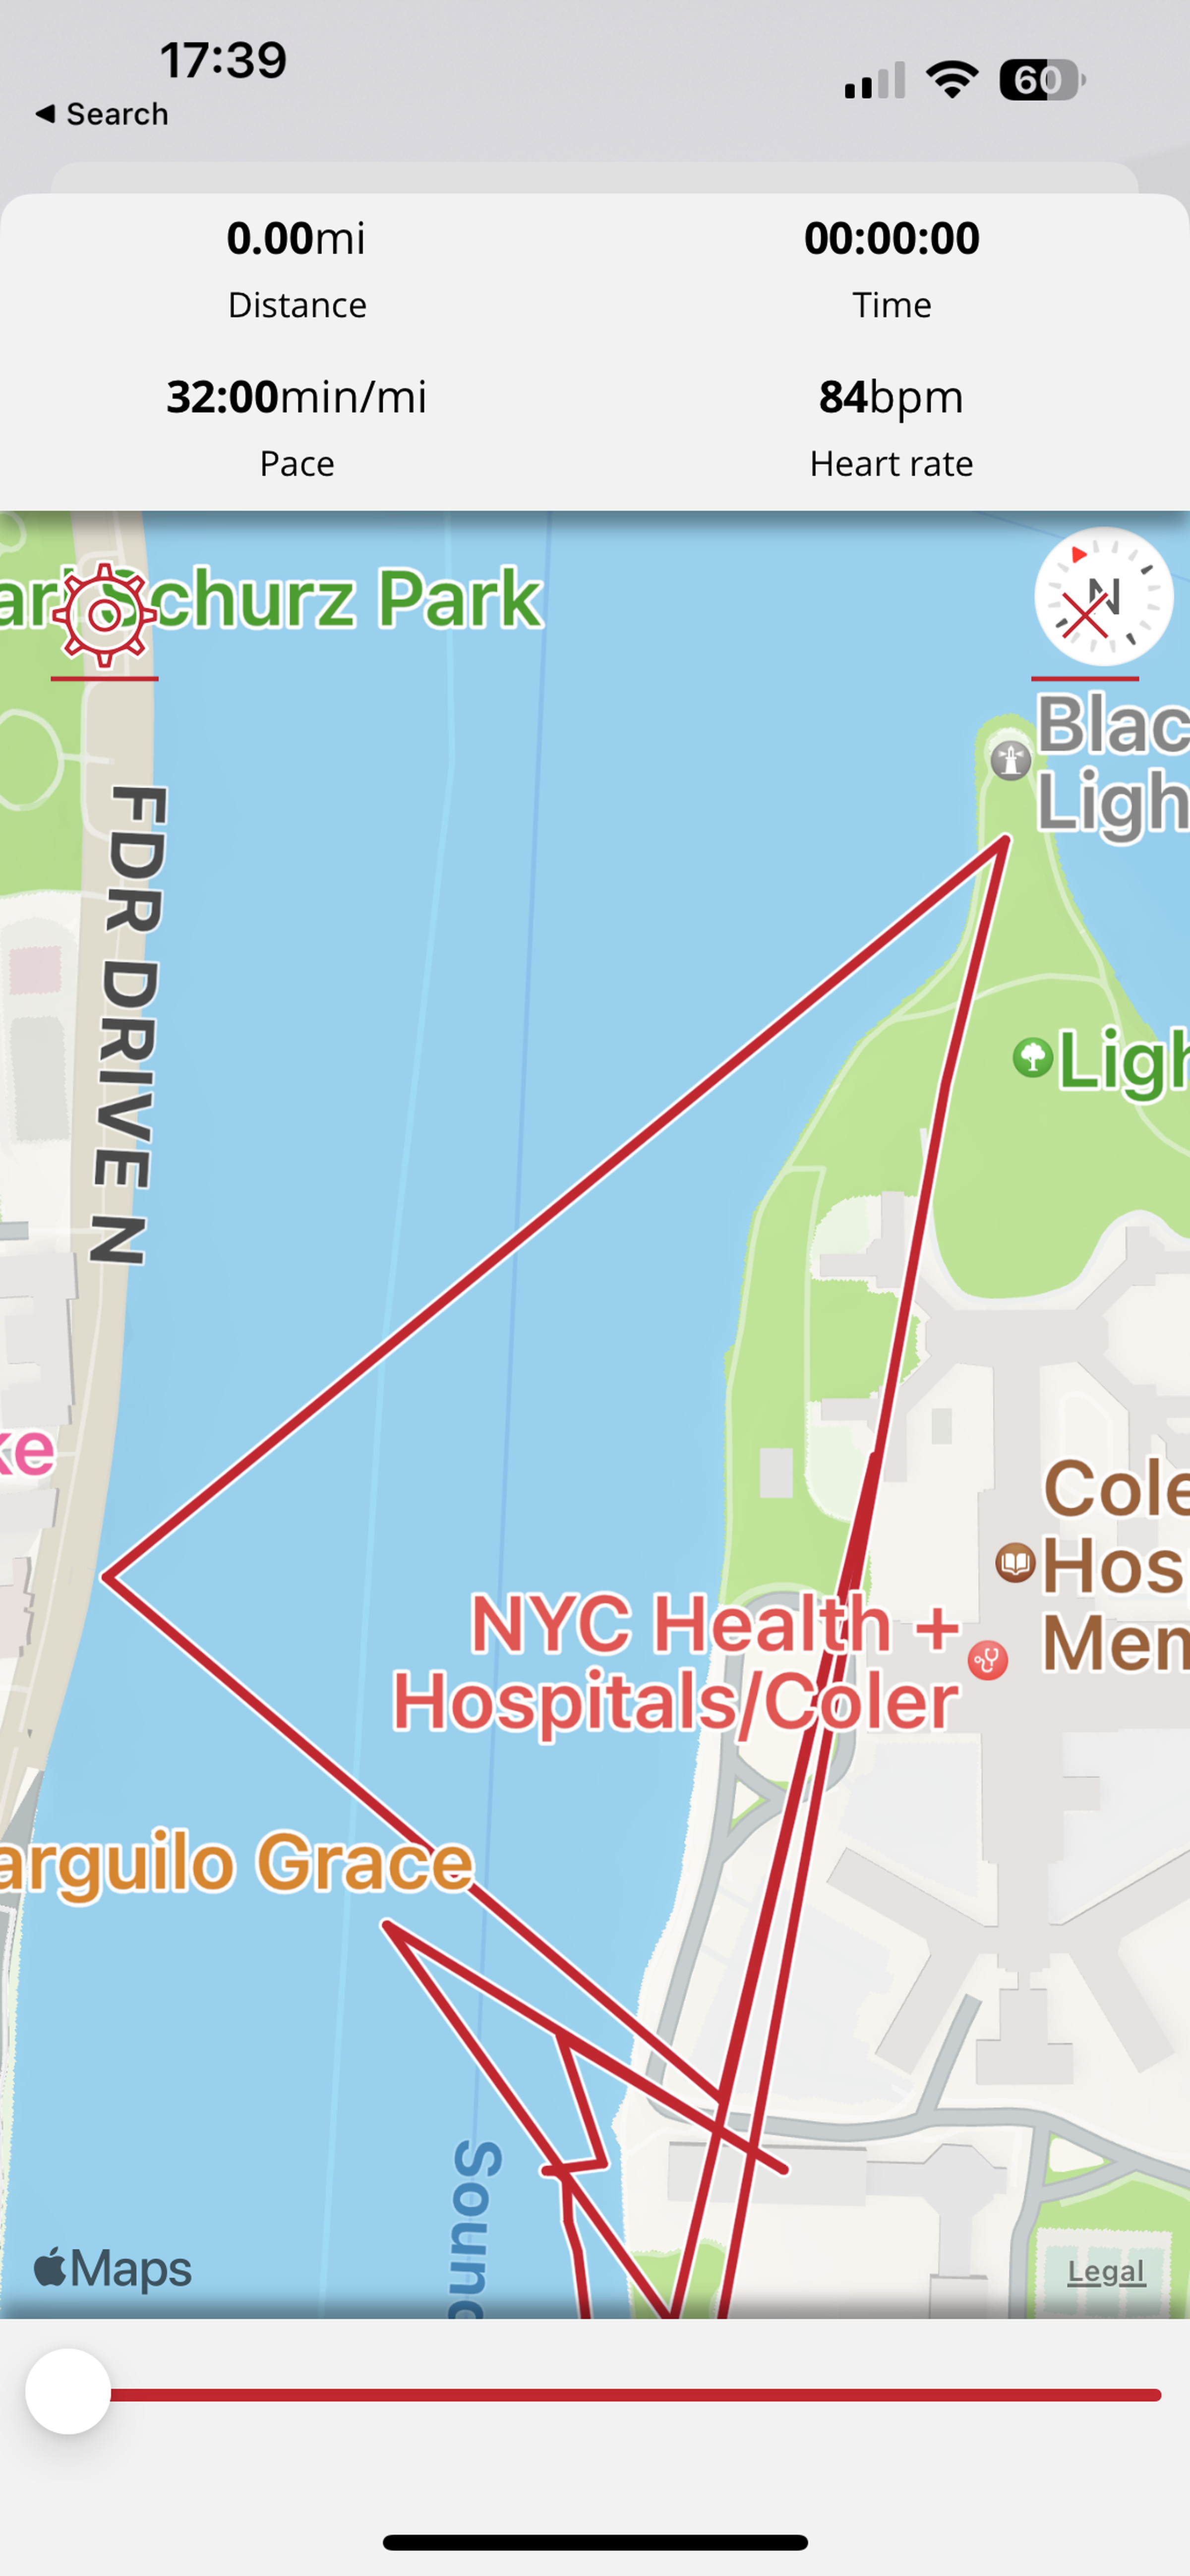 Polar Ignite 3 GPS map showing a jagged triangle that crosses into a nearby river, reaching Manhattan.